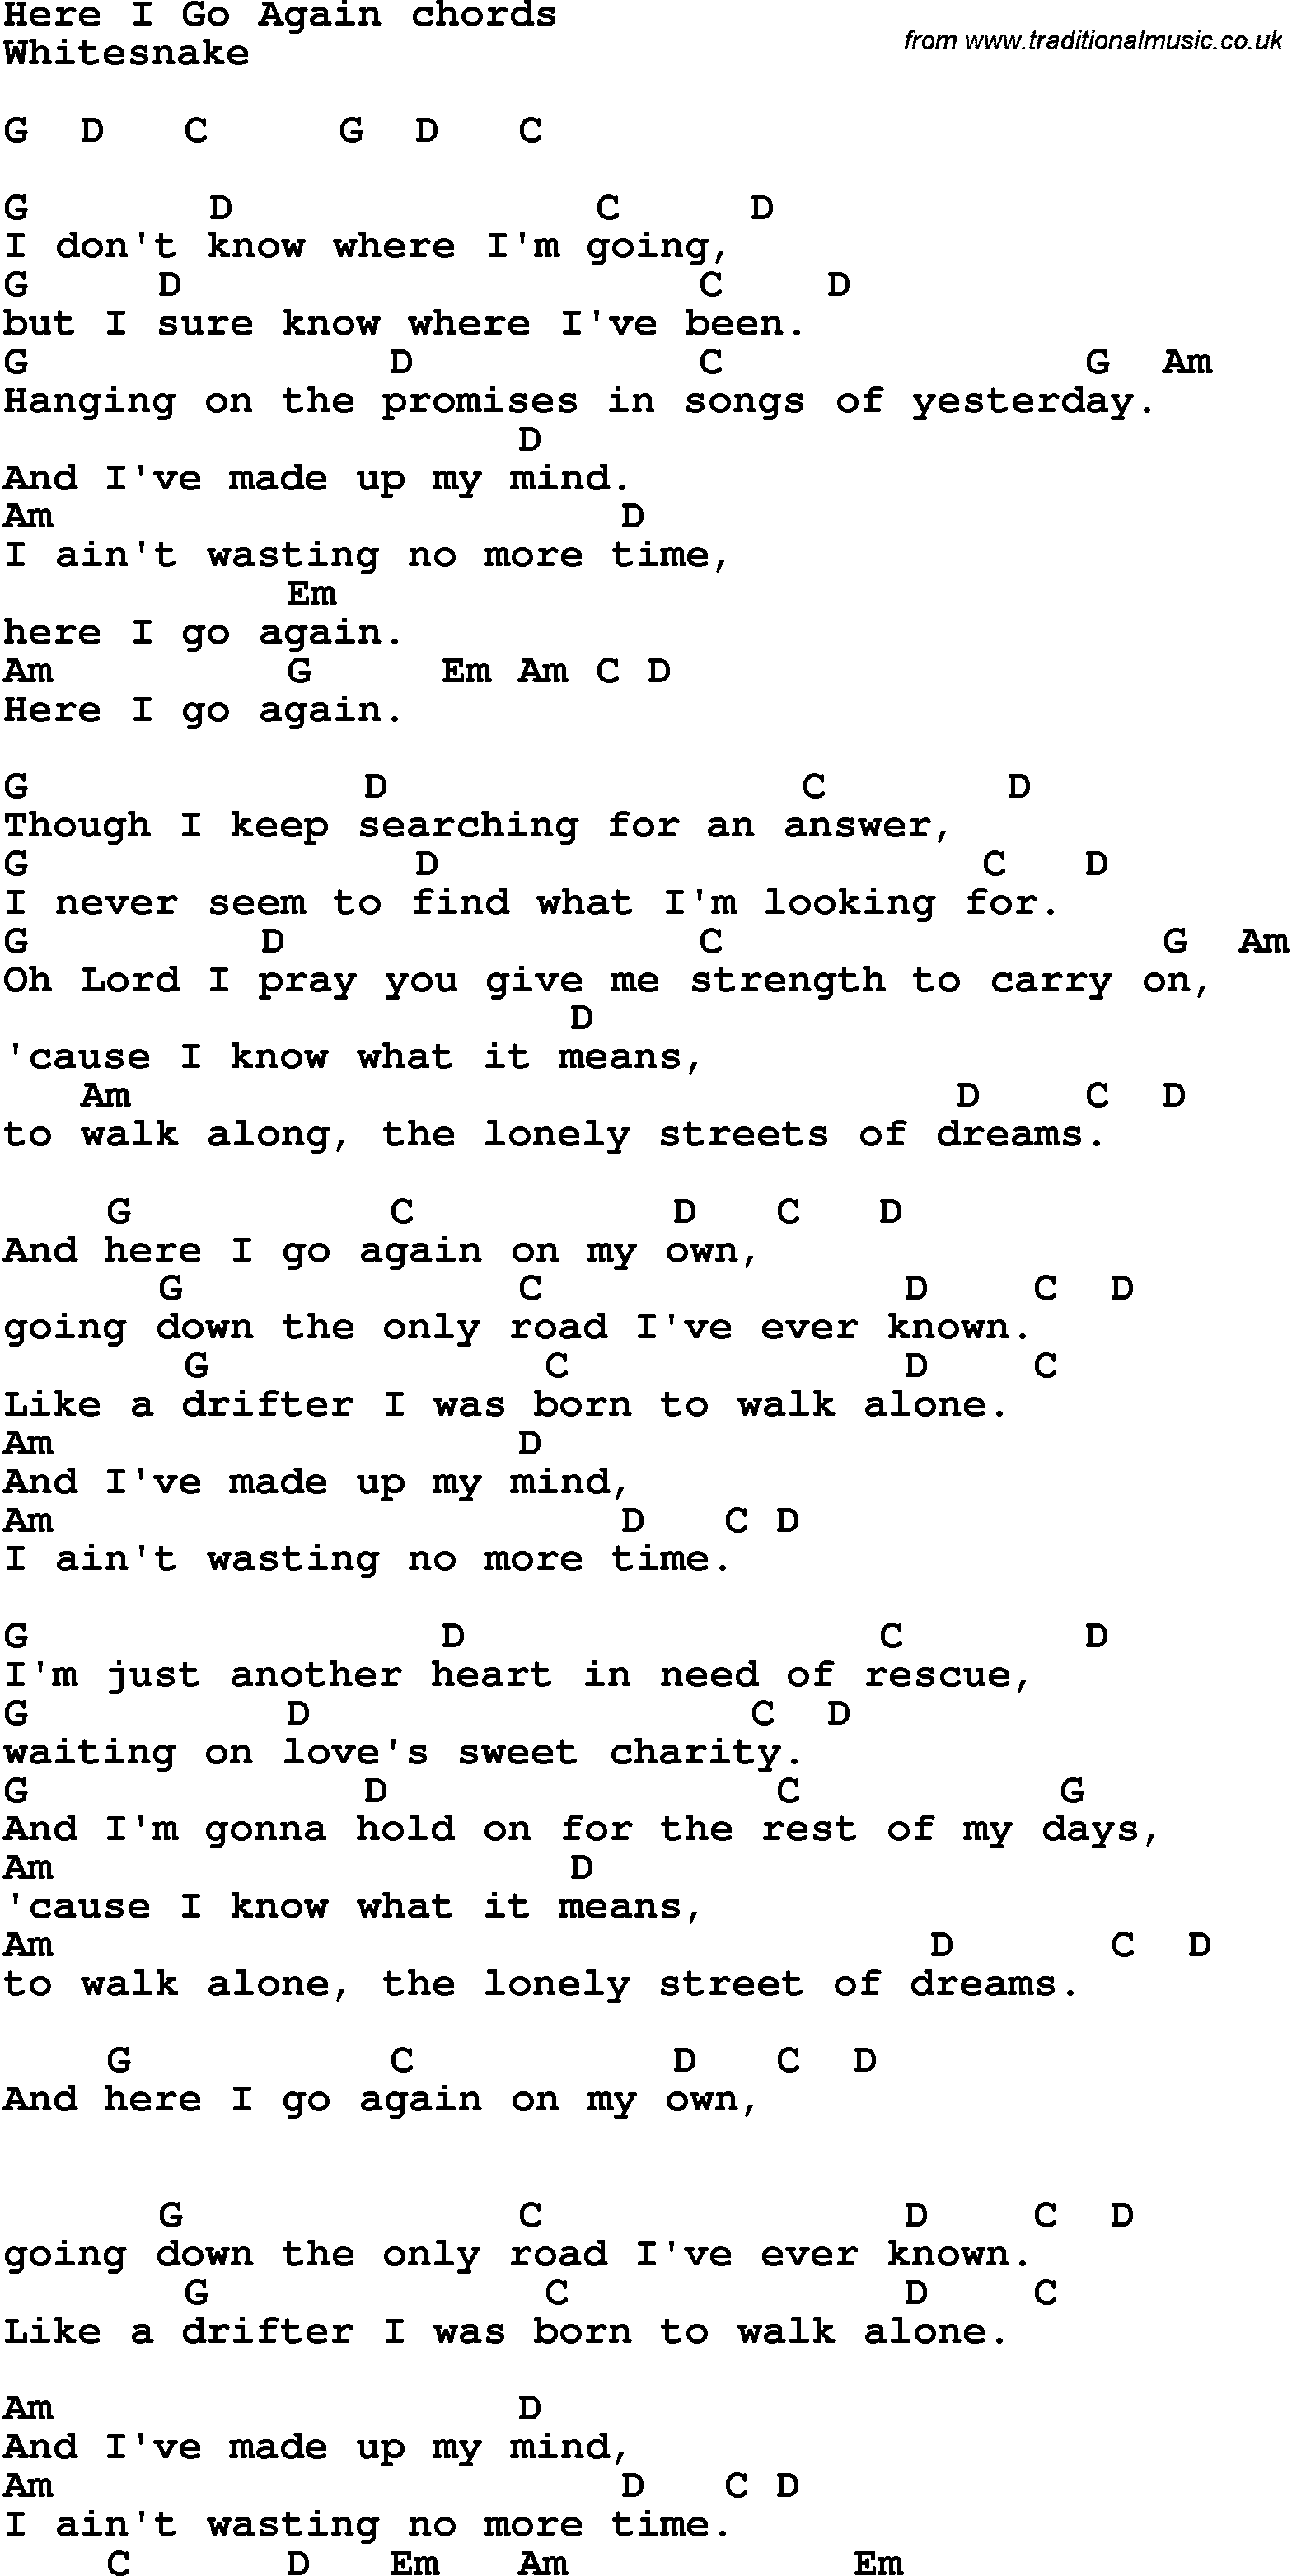 Song Lyrics with guitar chords for Here I Go Again